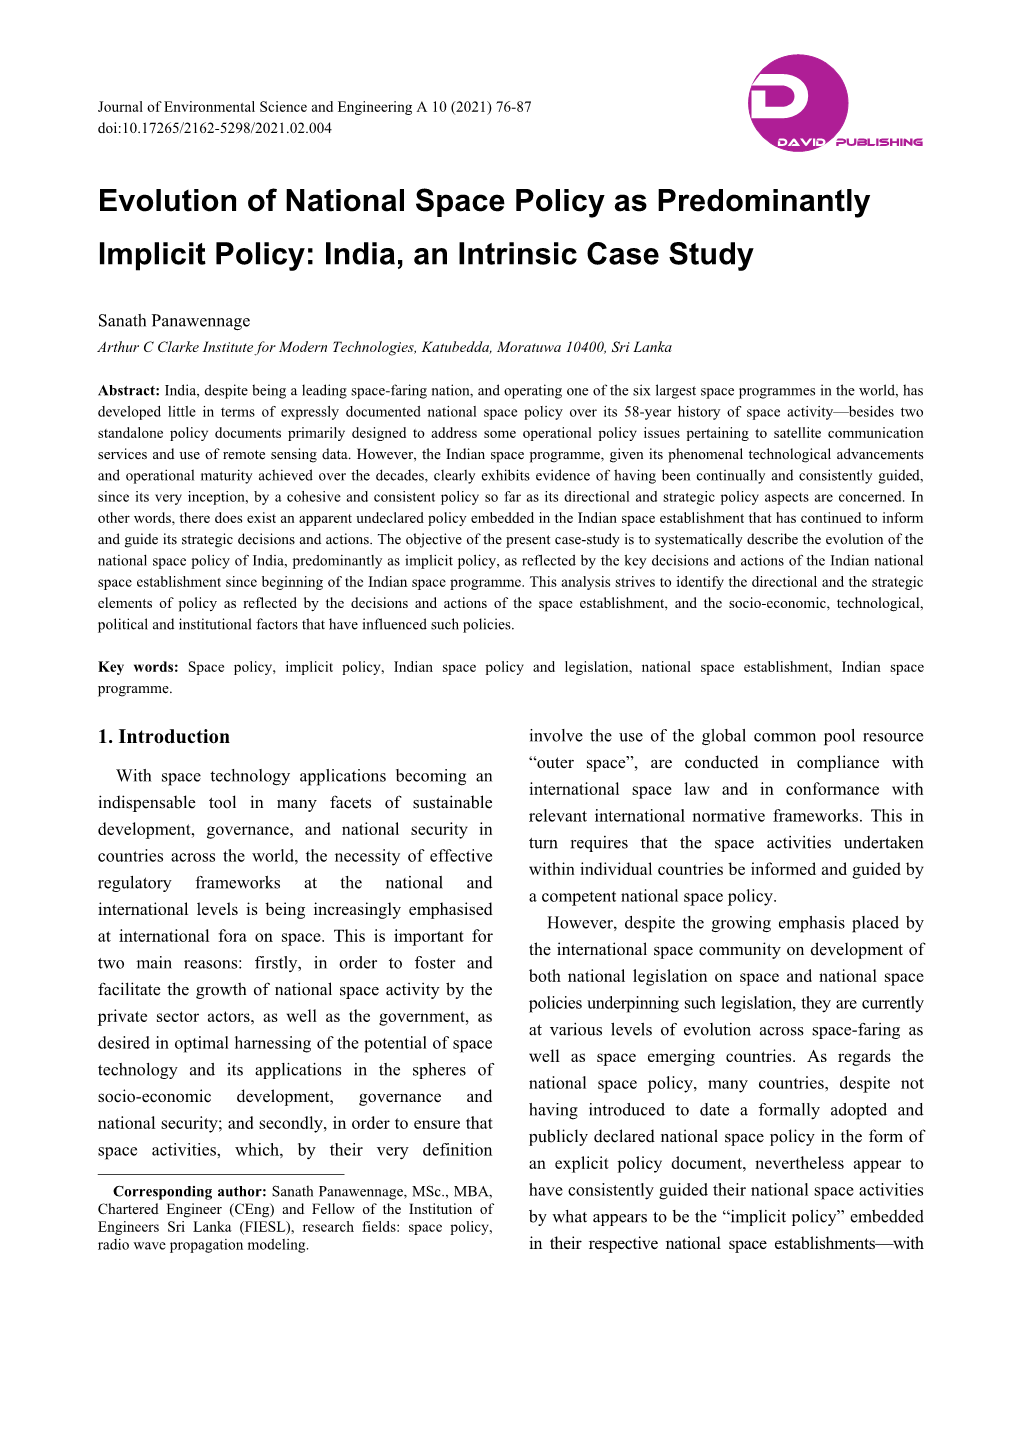 Evolution of National Space Policy As Predominantly Implicit Policy: India, an Intrinsic Case Study